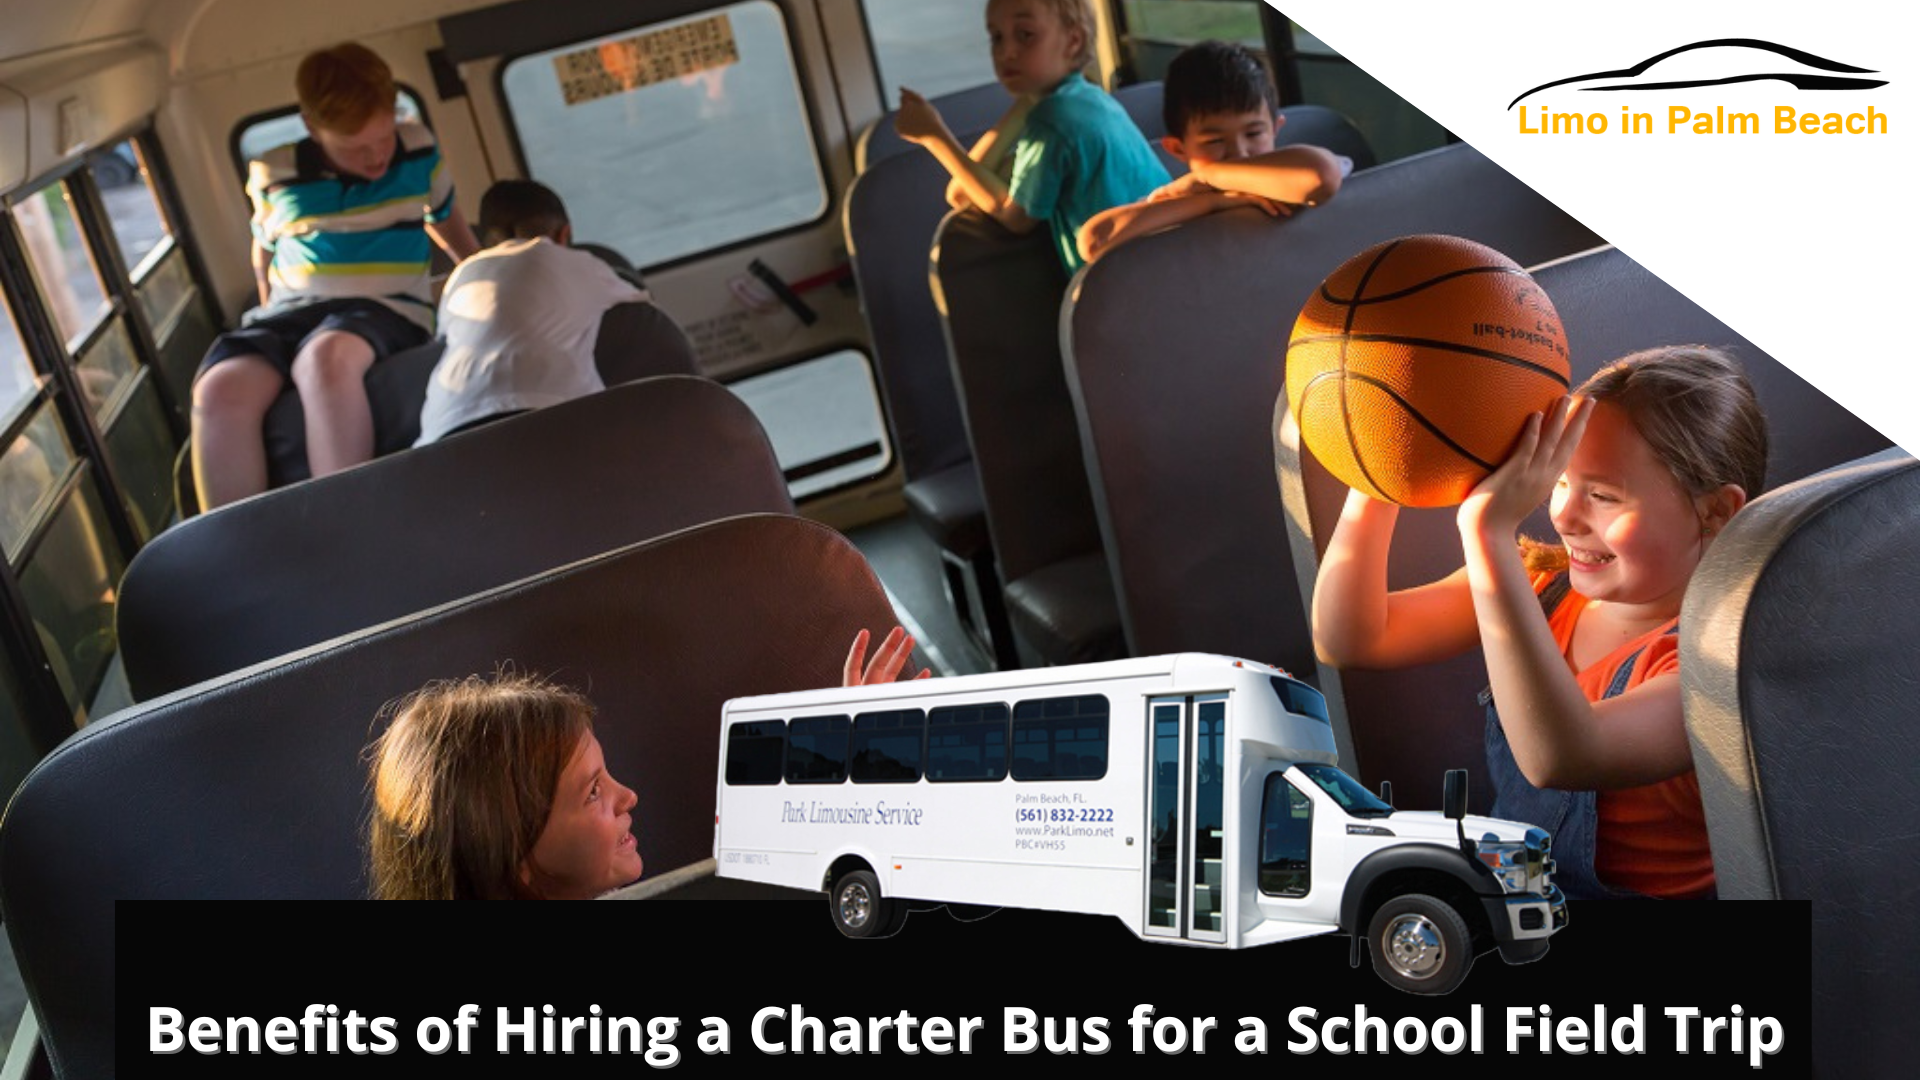  Benefits of Hiring a Charter Bus for a School Field Trip